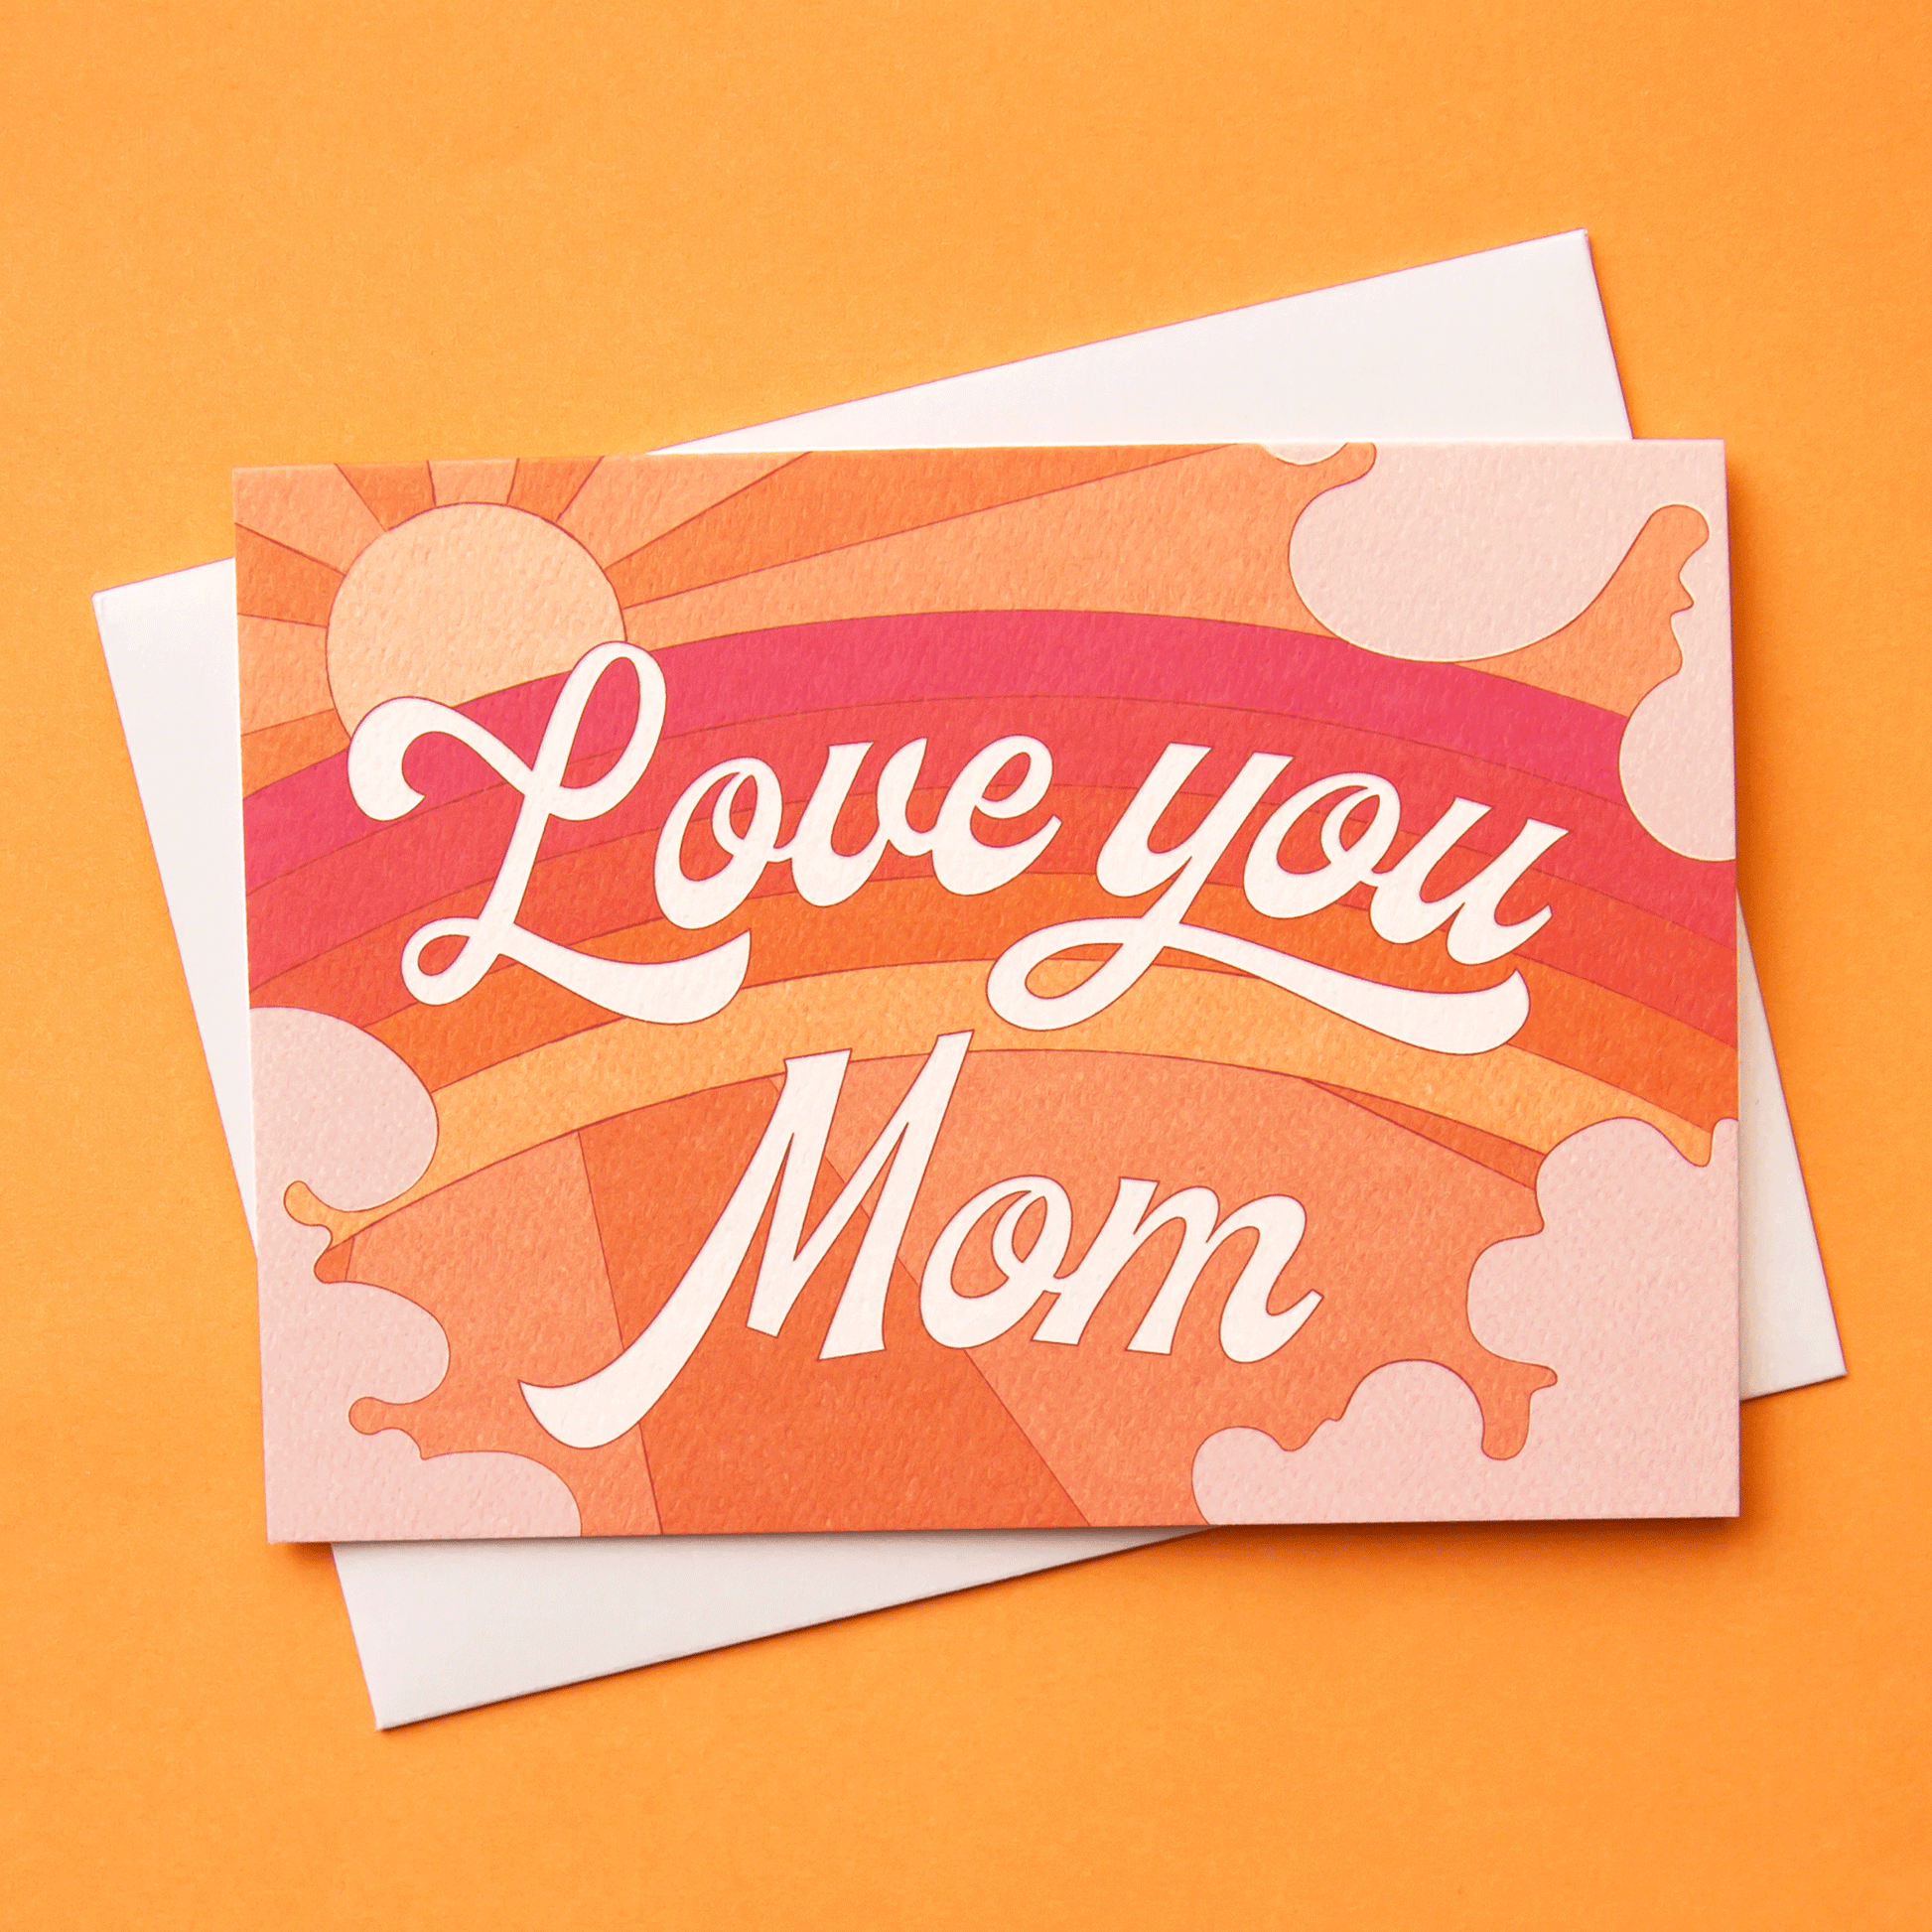 A card with a rainbow graphic made with shades or orange, pink and red along with a shining sun, subtle clouds around the edge and white cursive text that reads, "Love you Mom" in the center as well as a white envelope.